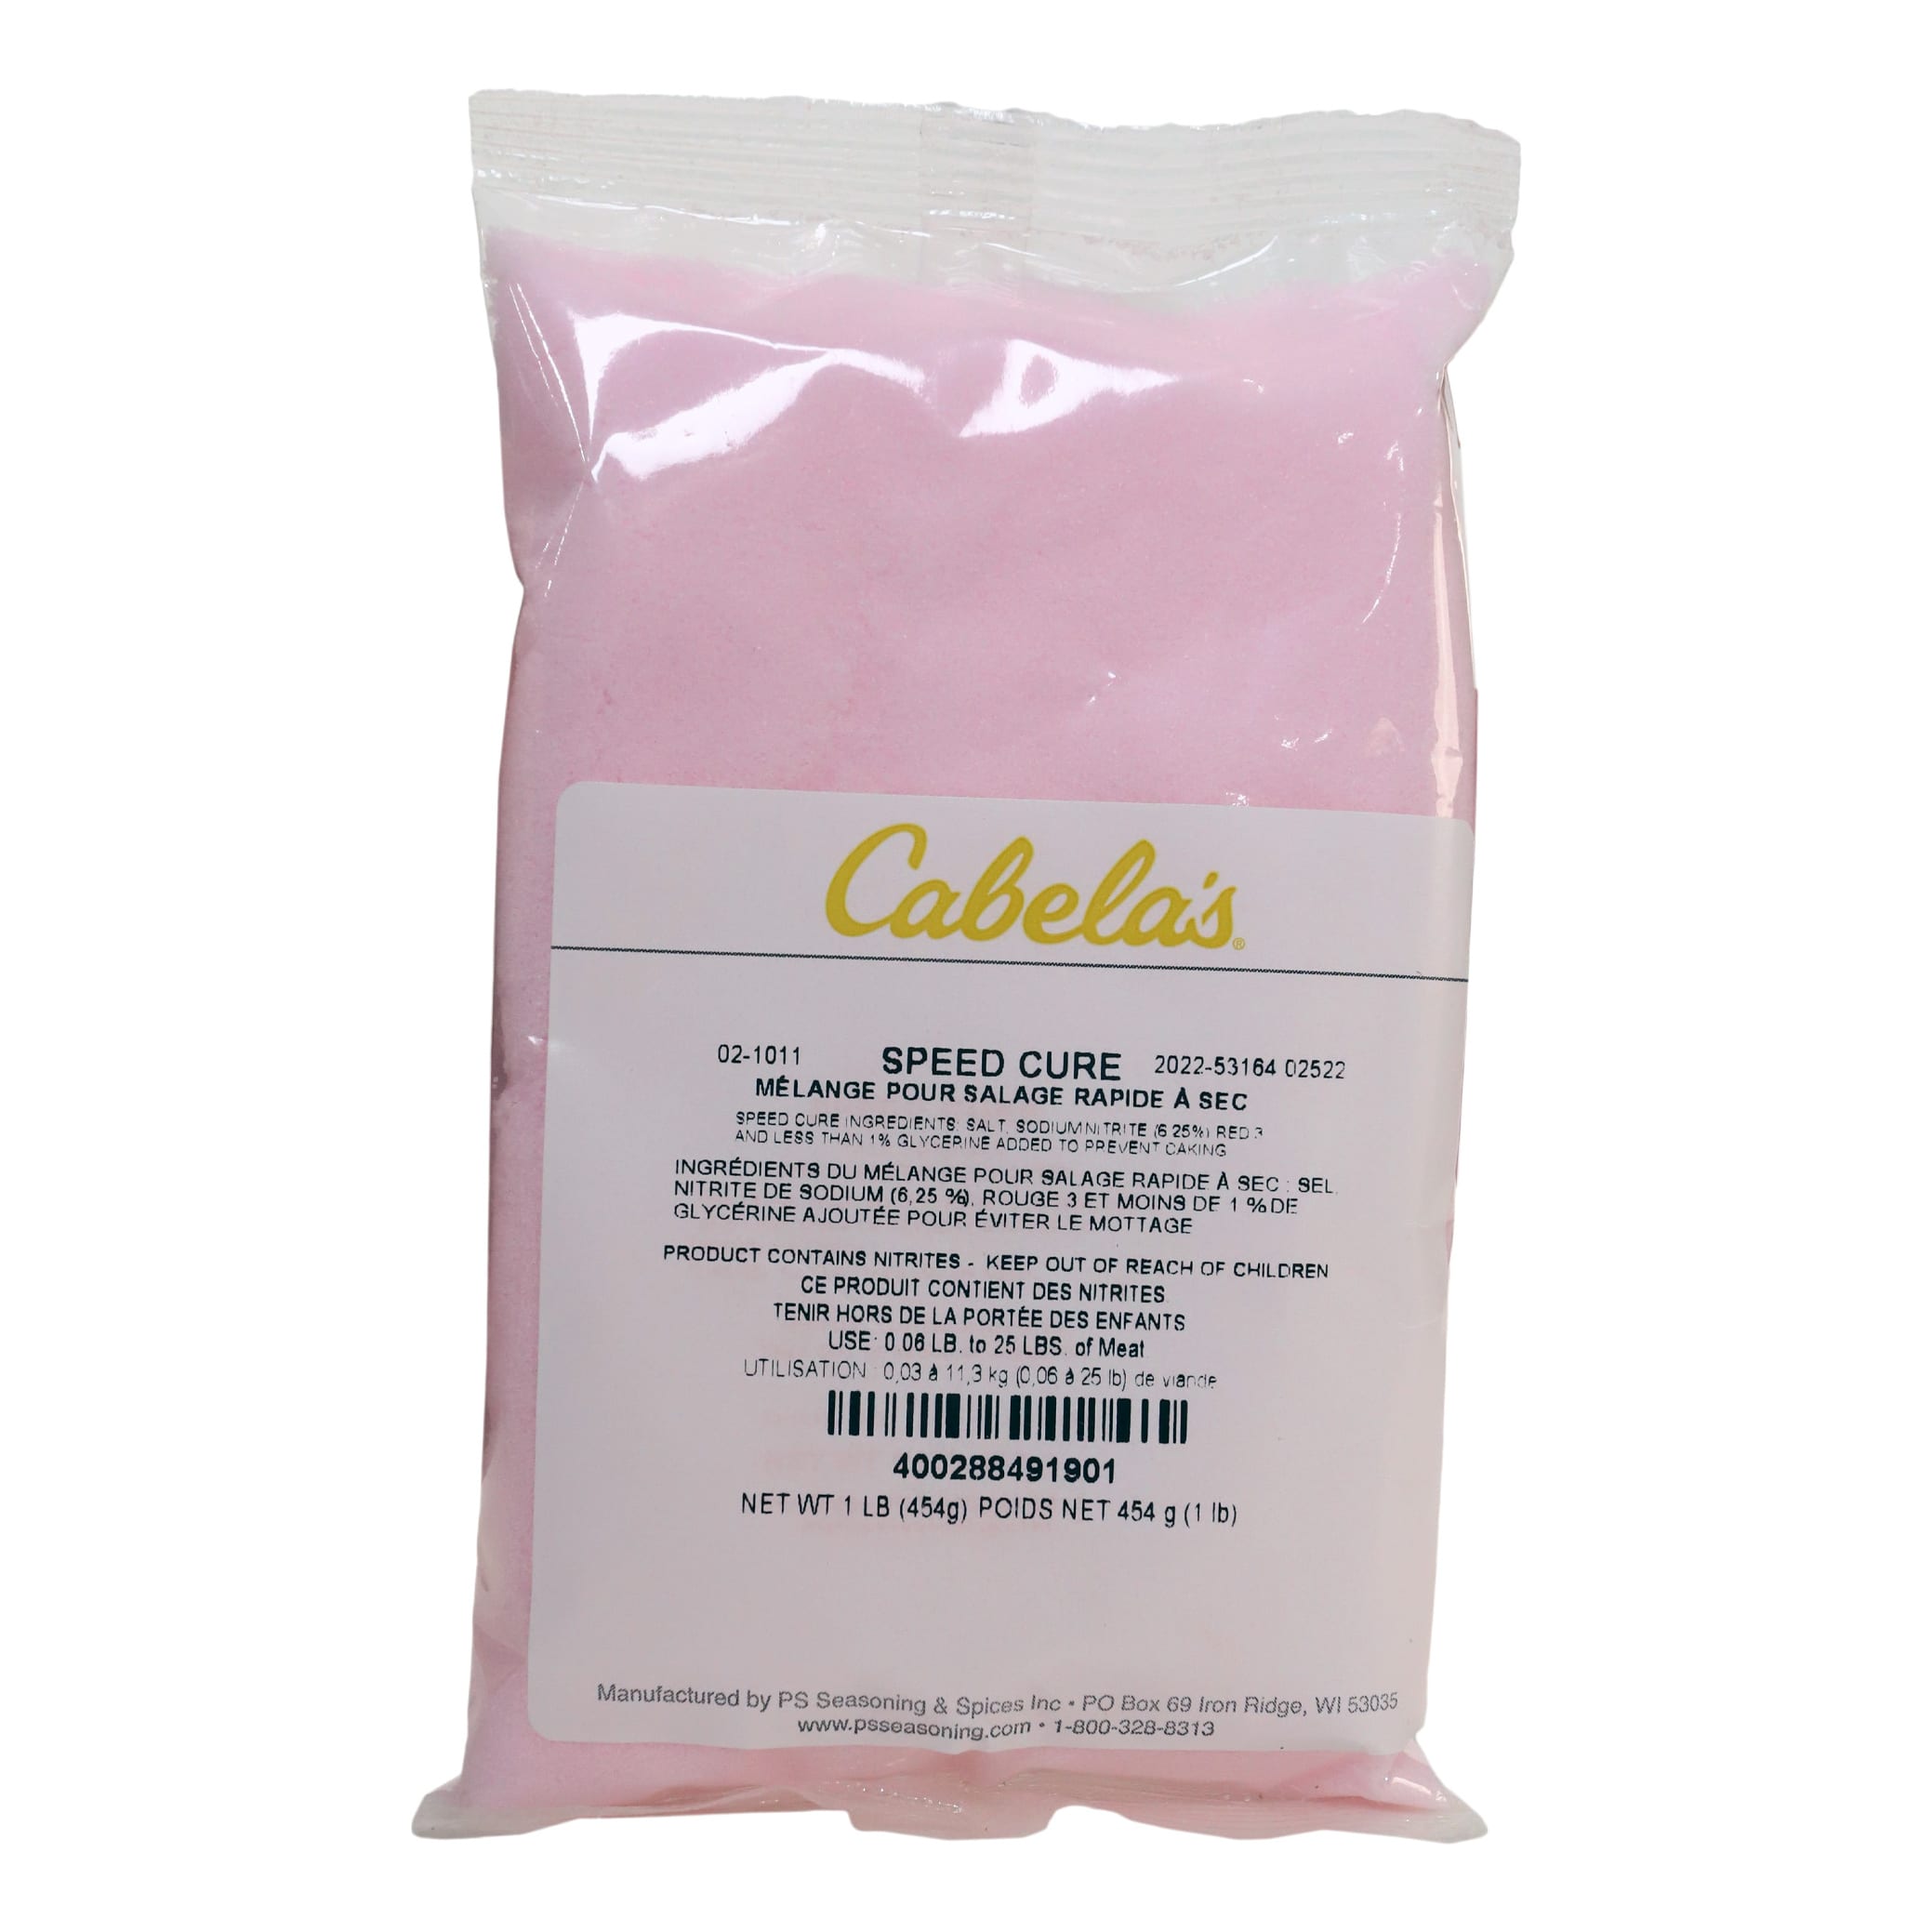 Cabela’s® Speed Cure – 1 lb.